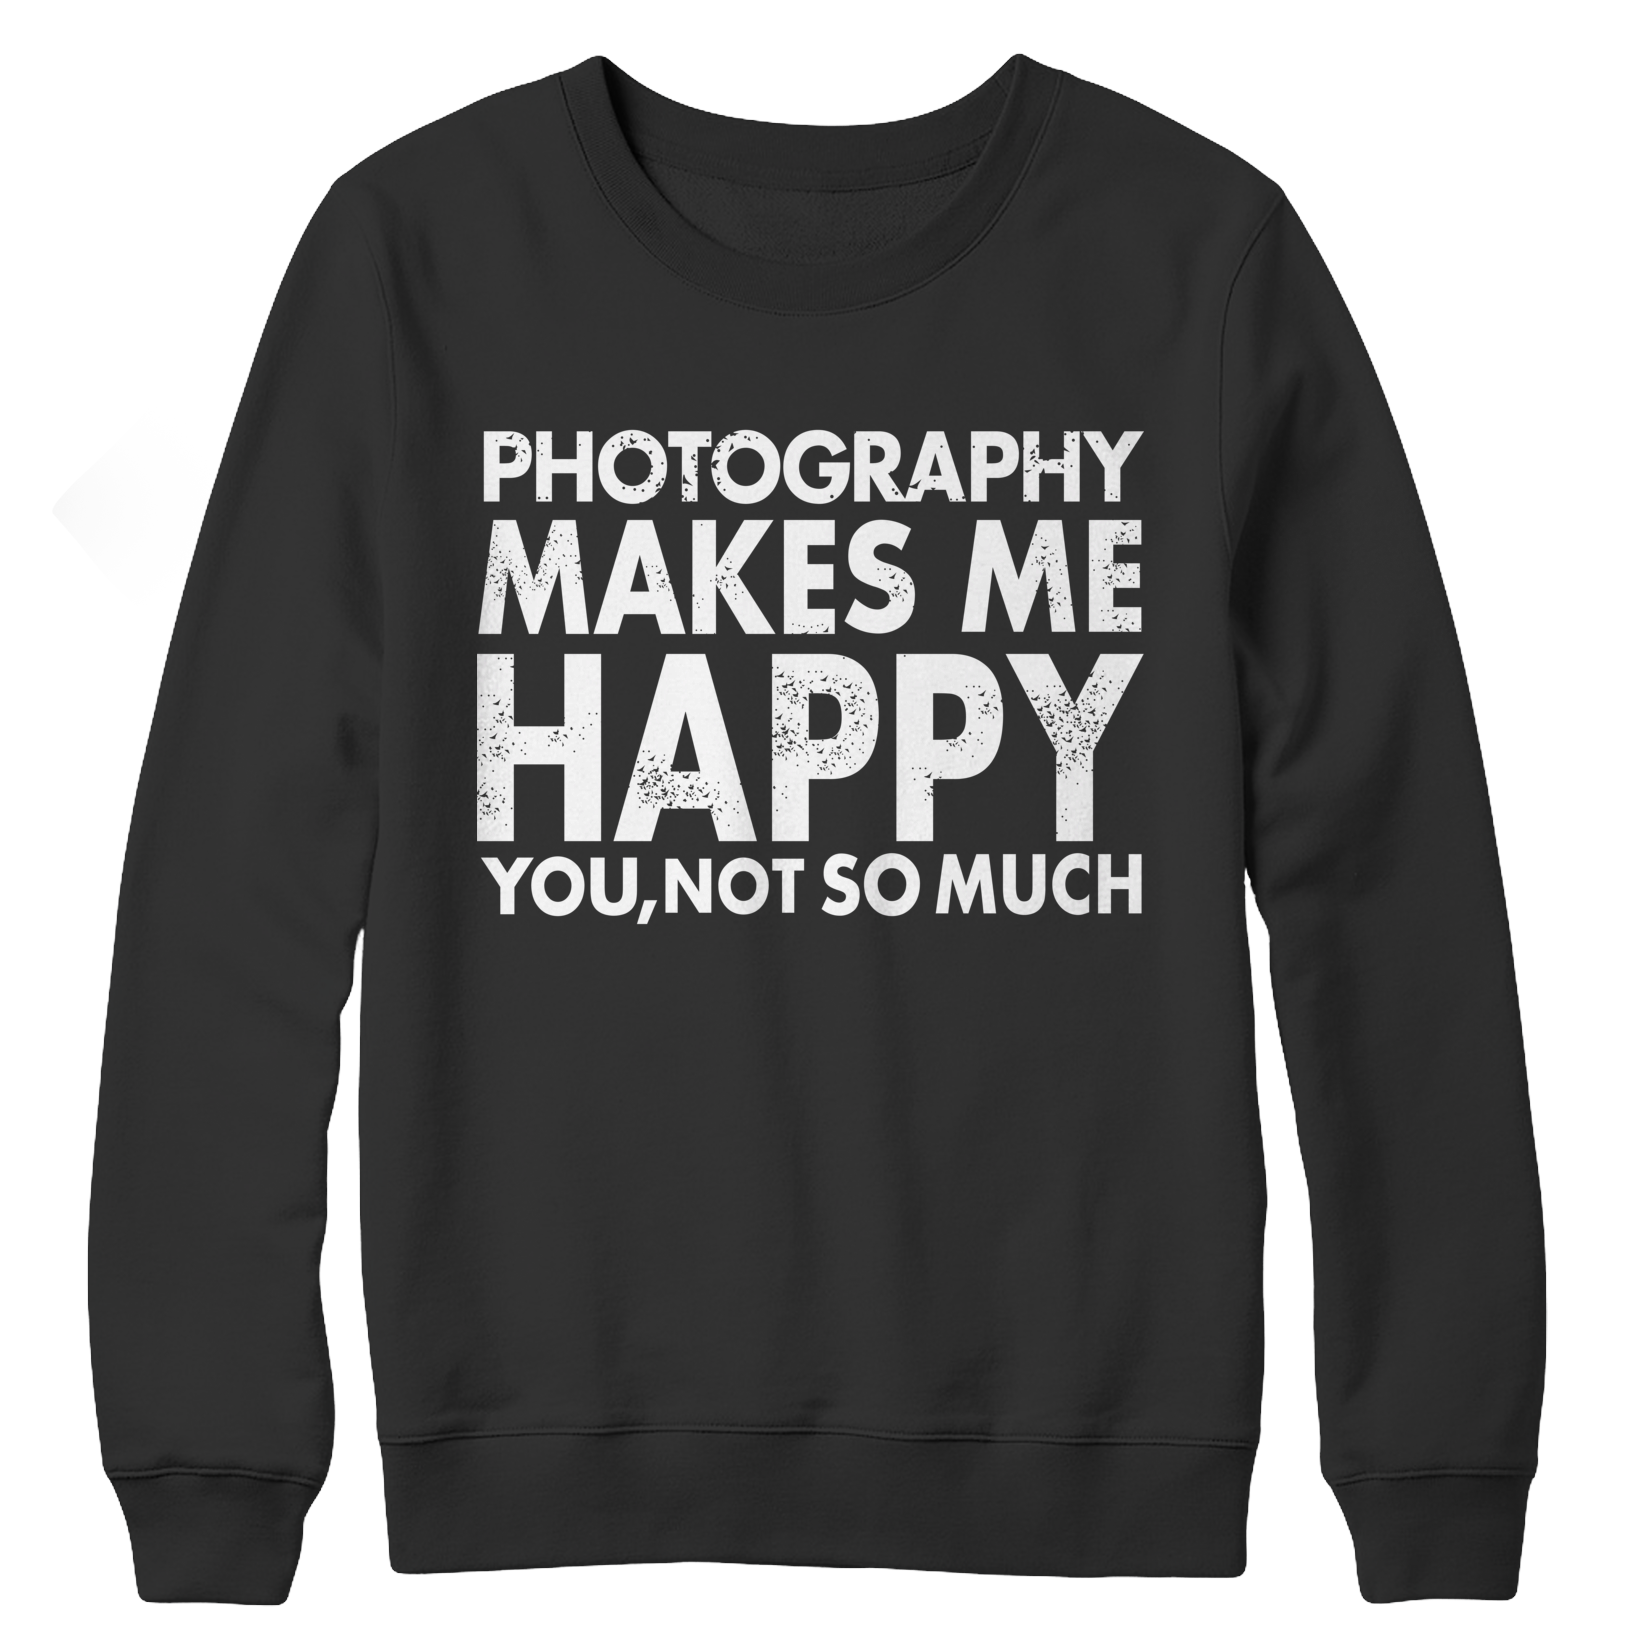 Photography Makes Me Happy You, Not So Much Crewneck Fleece Shirt